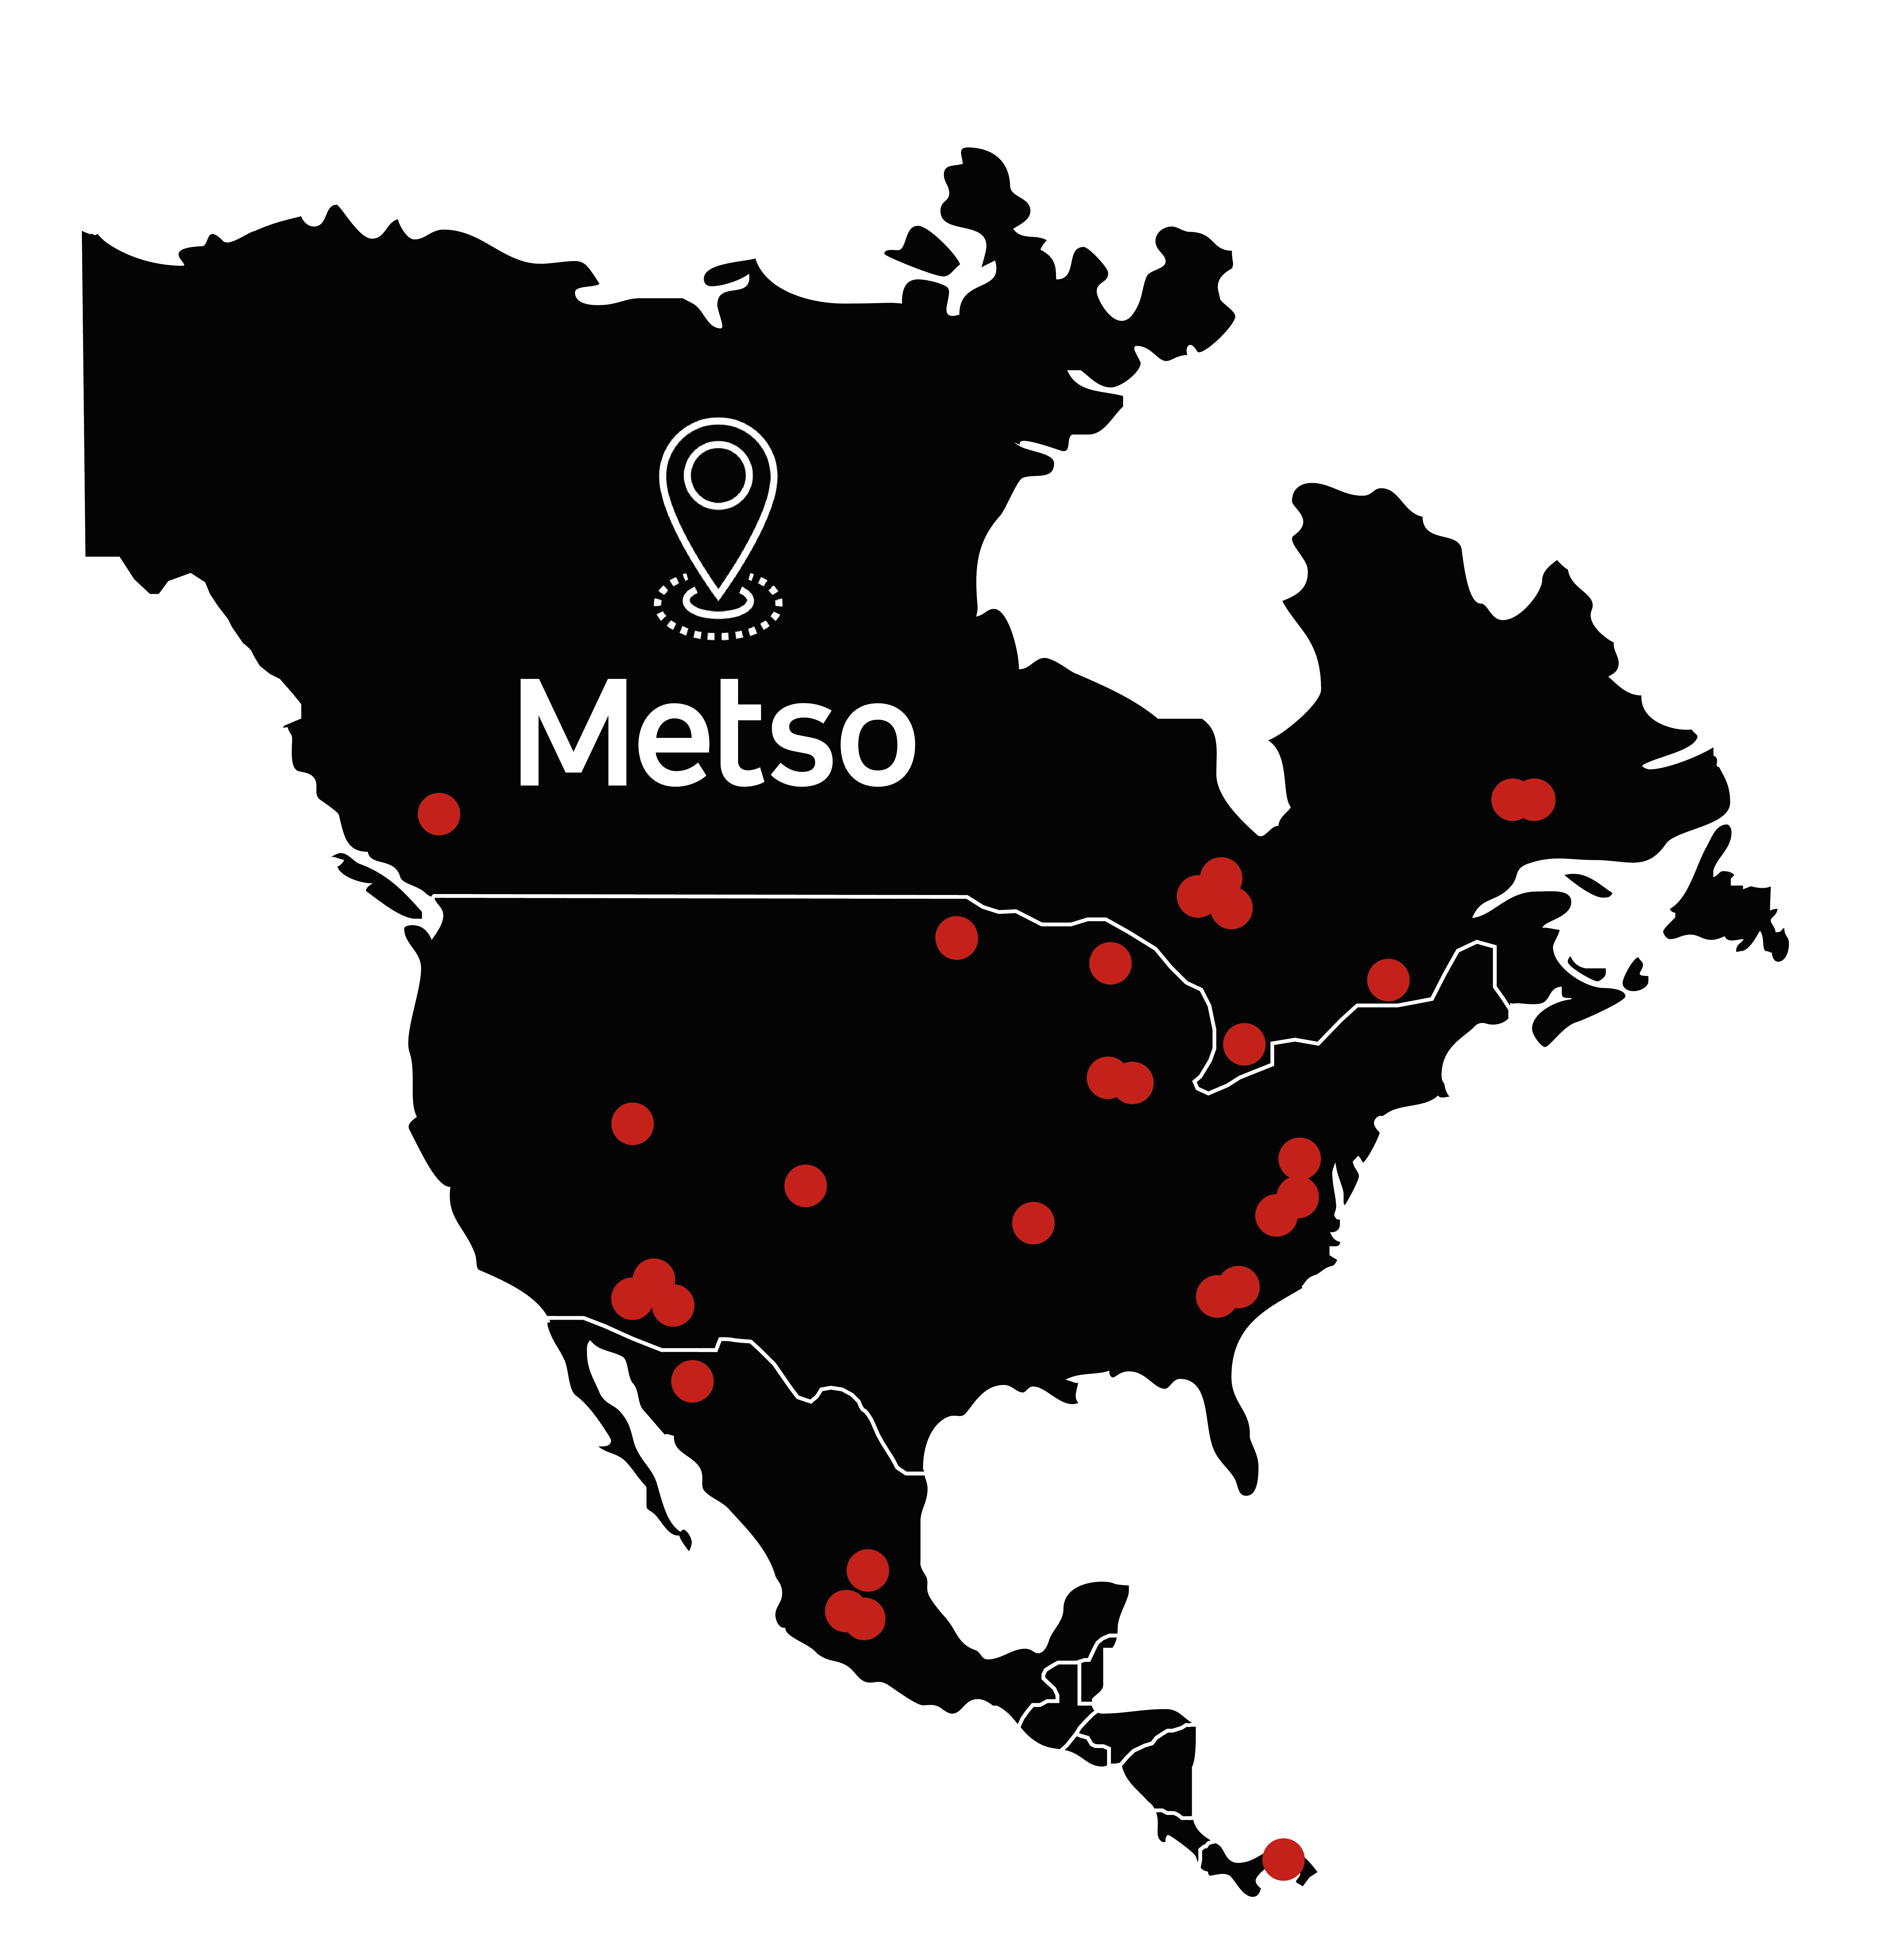 Map of North and Central America with MetsoOutotec locations